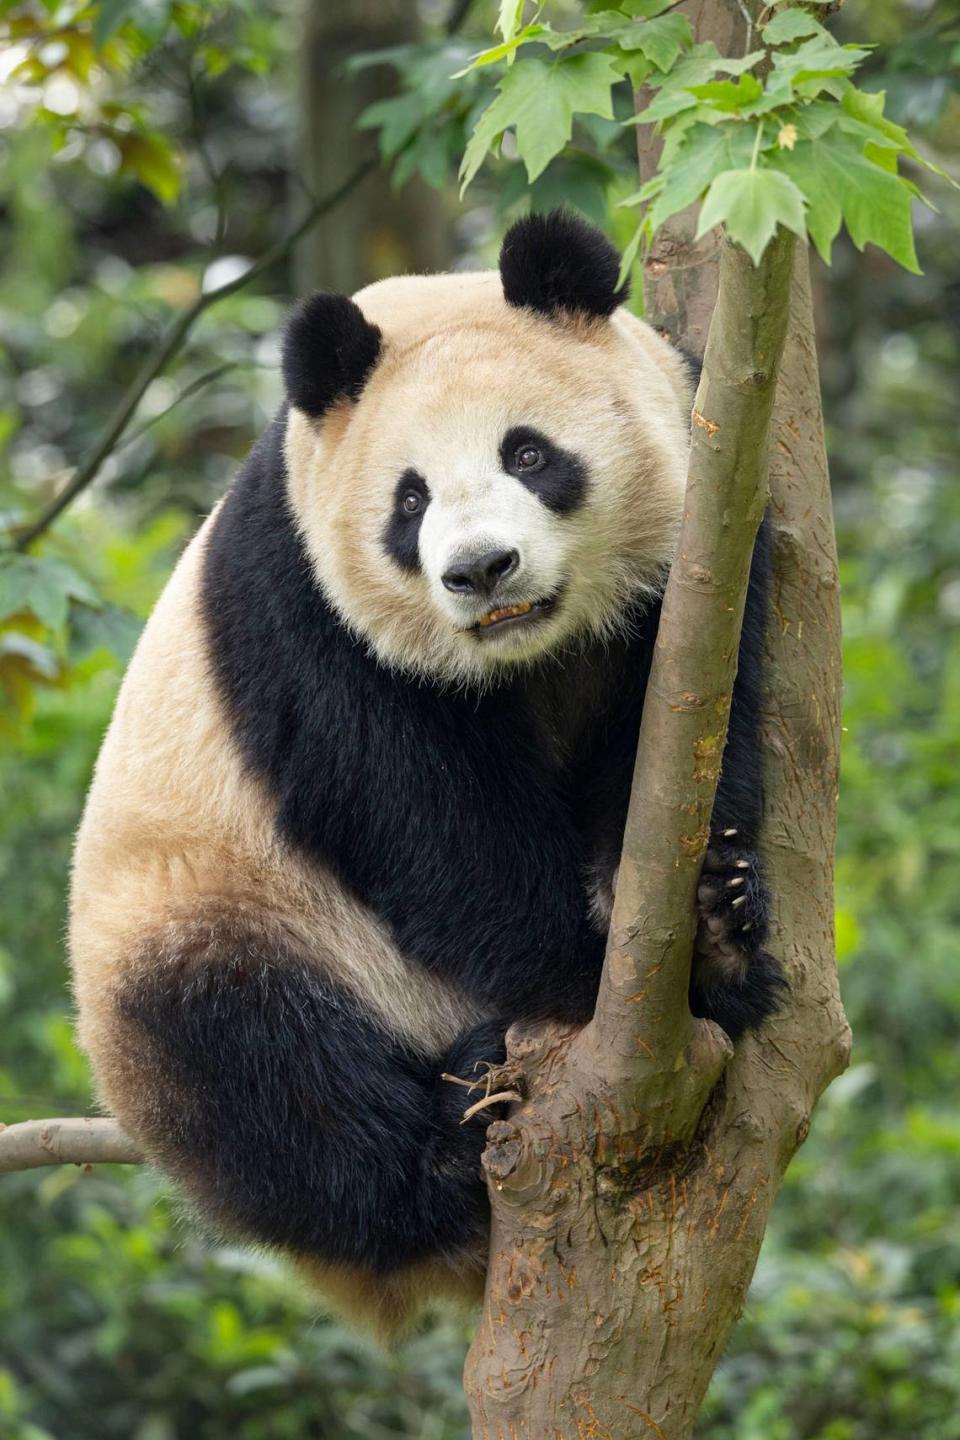 Xin Bao, a female giant panda and “a gentle and witty introvert” will join Yun Chuan as a new member of the San Diego Zoo family.